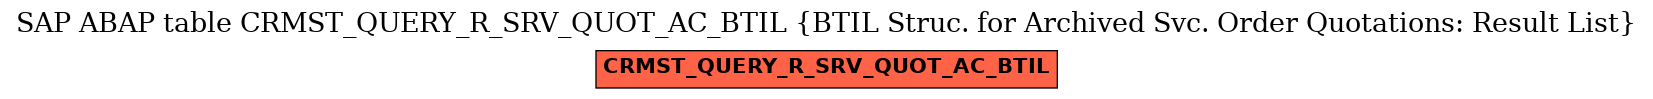 E-R Diagram for table CRMST_QUERY_R_SRV_QUOT_AC_BTIL (BTIL Struc. for Archived Svc. Order Quotations: Result List)